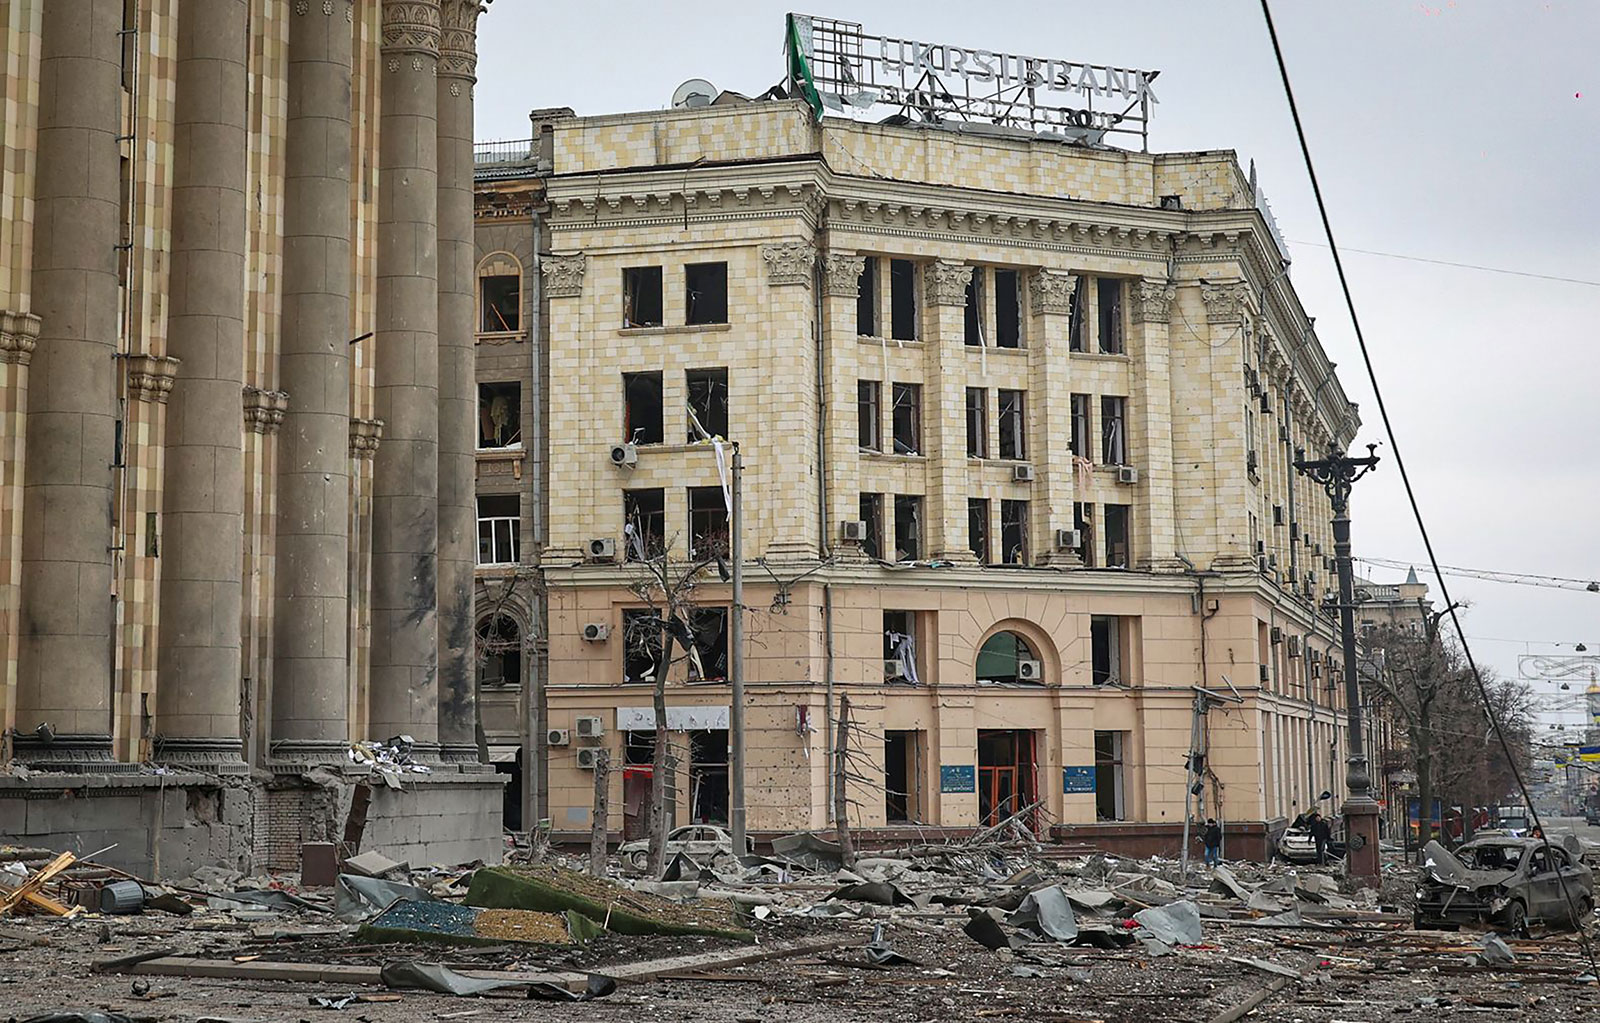 Debris is scattered outside of a state administration building in Kharkiv, Ukraine, on March 1.